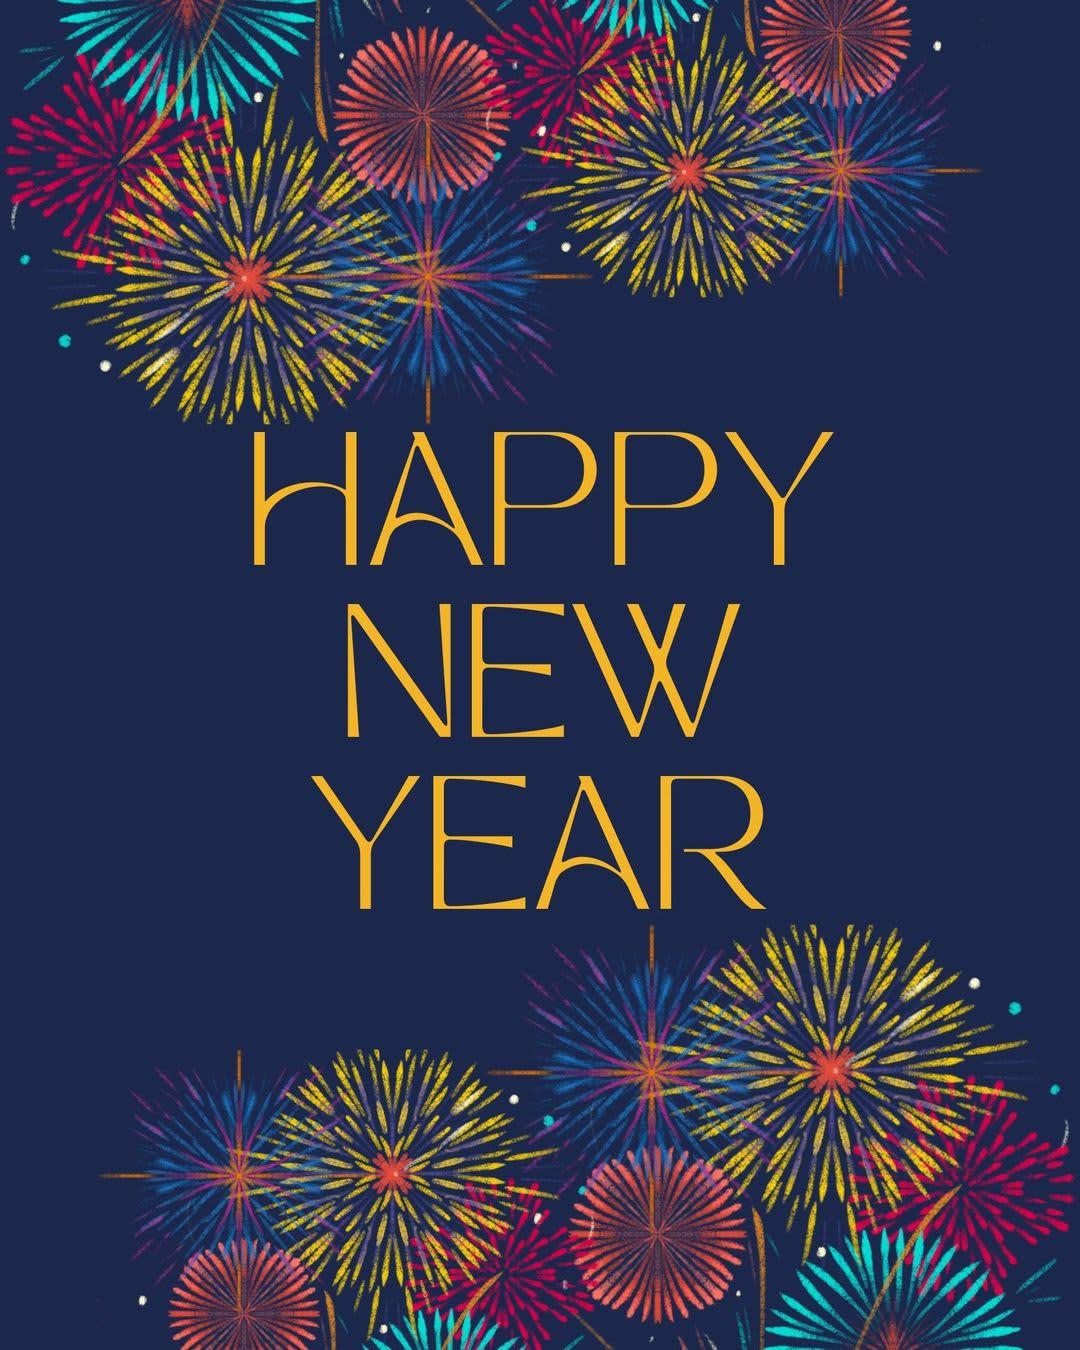 Happy New Year from our team to yours! 